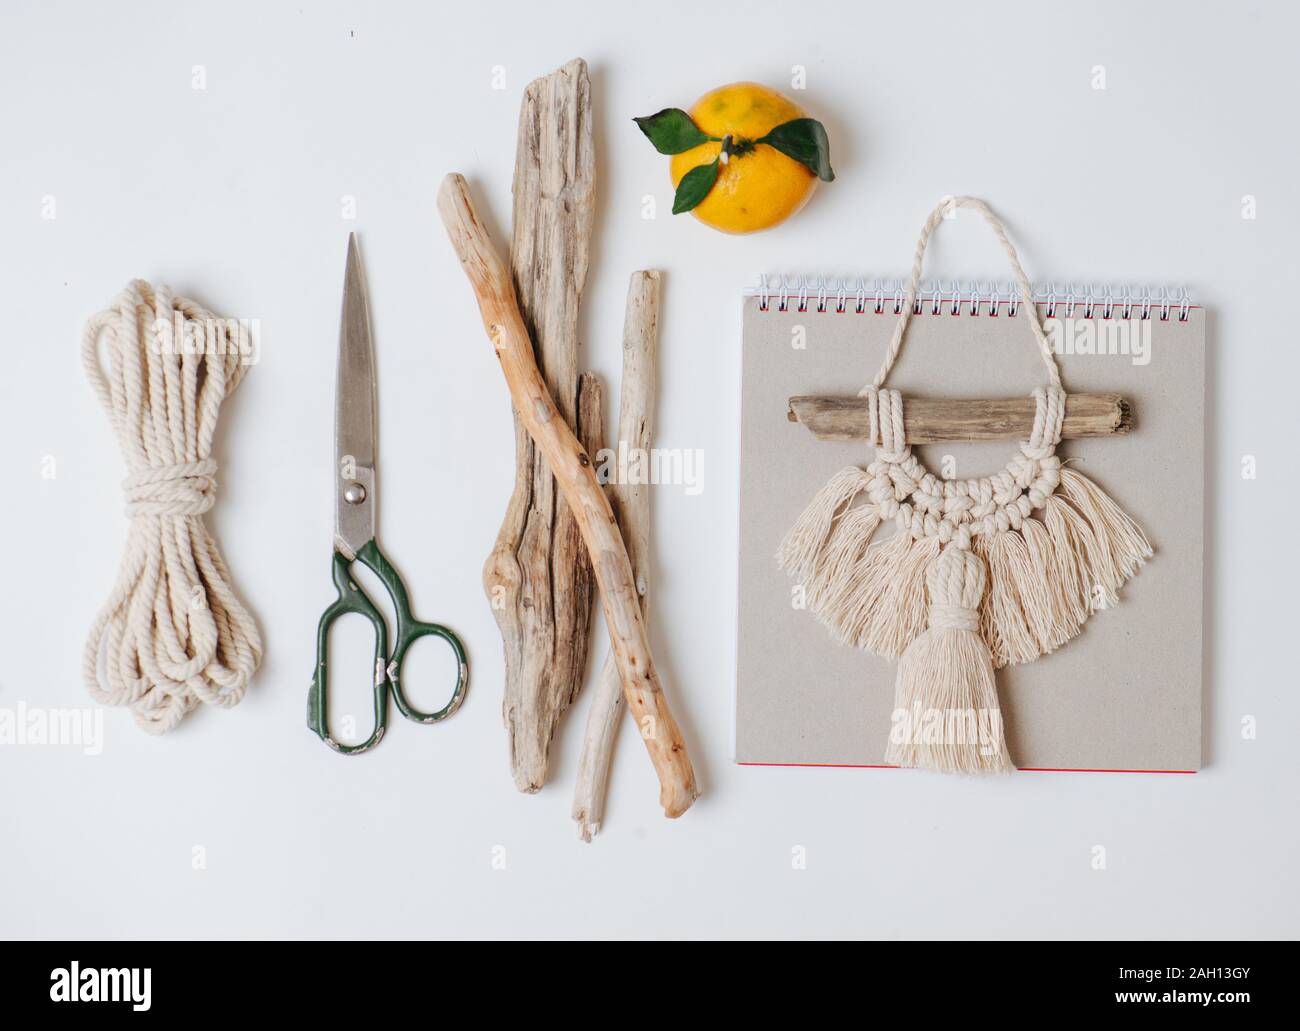 Tools and materials for macrame weaving over white surface Stock Photo -  Alamy